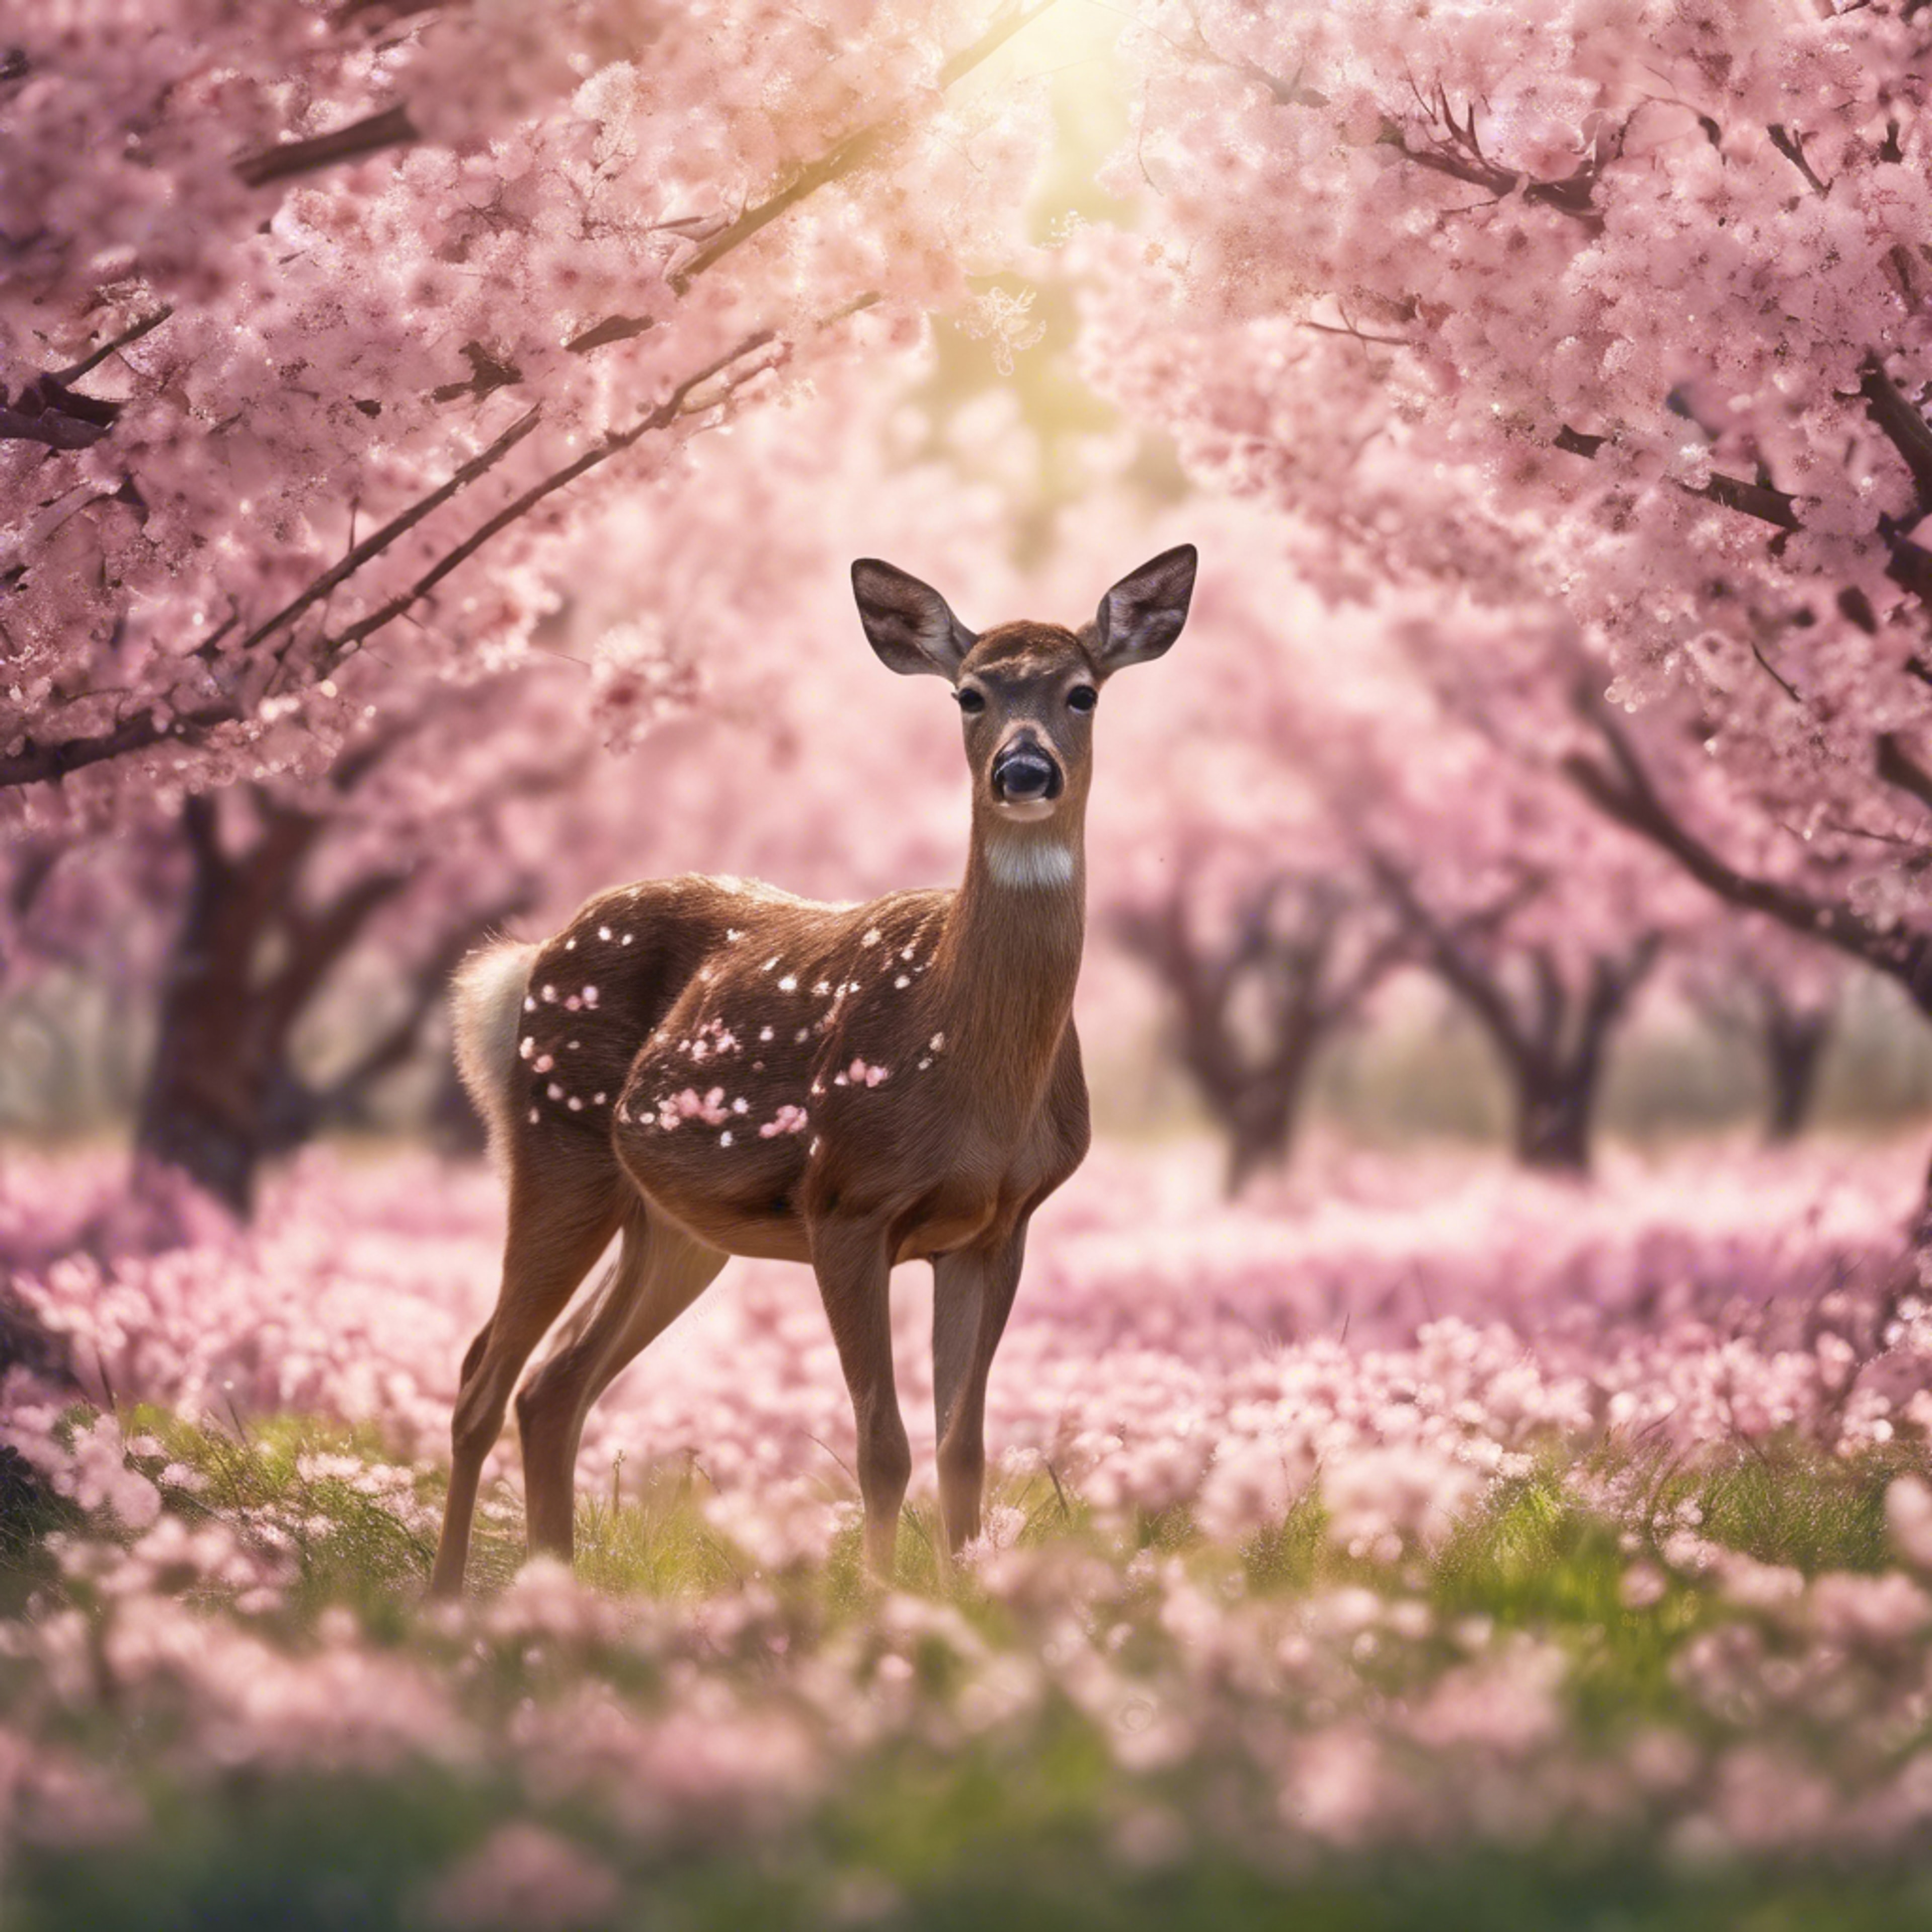 An illustration of a young deer grazing in a field of blooming cherry trees. Kertas dinding[a2b025554c3c4b6aabc3]